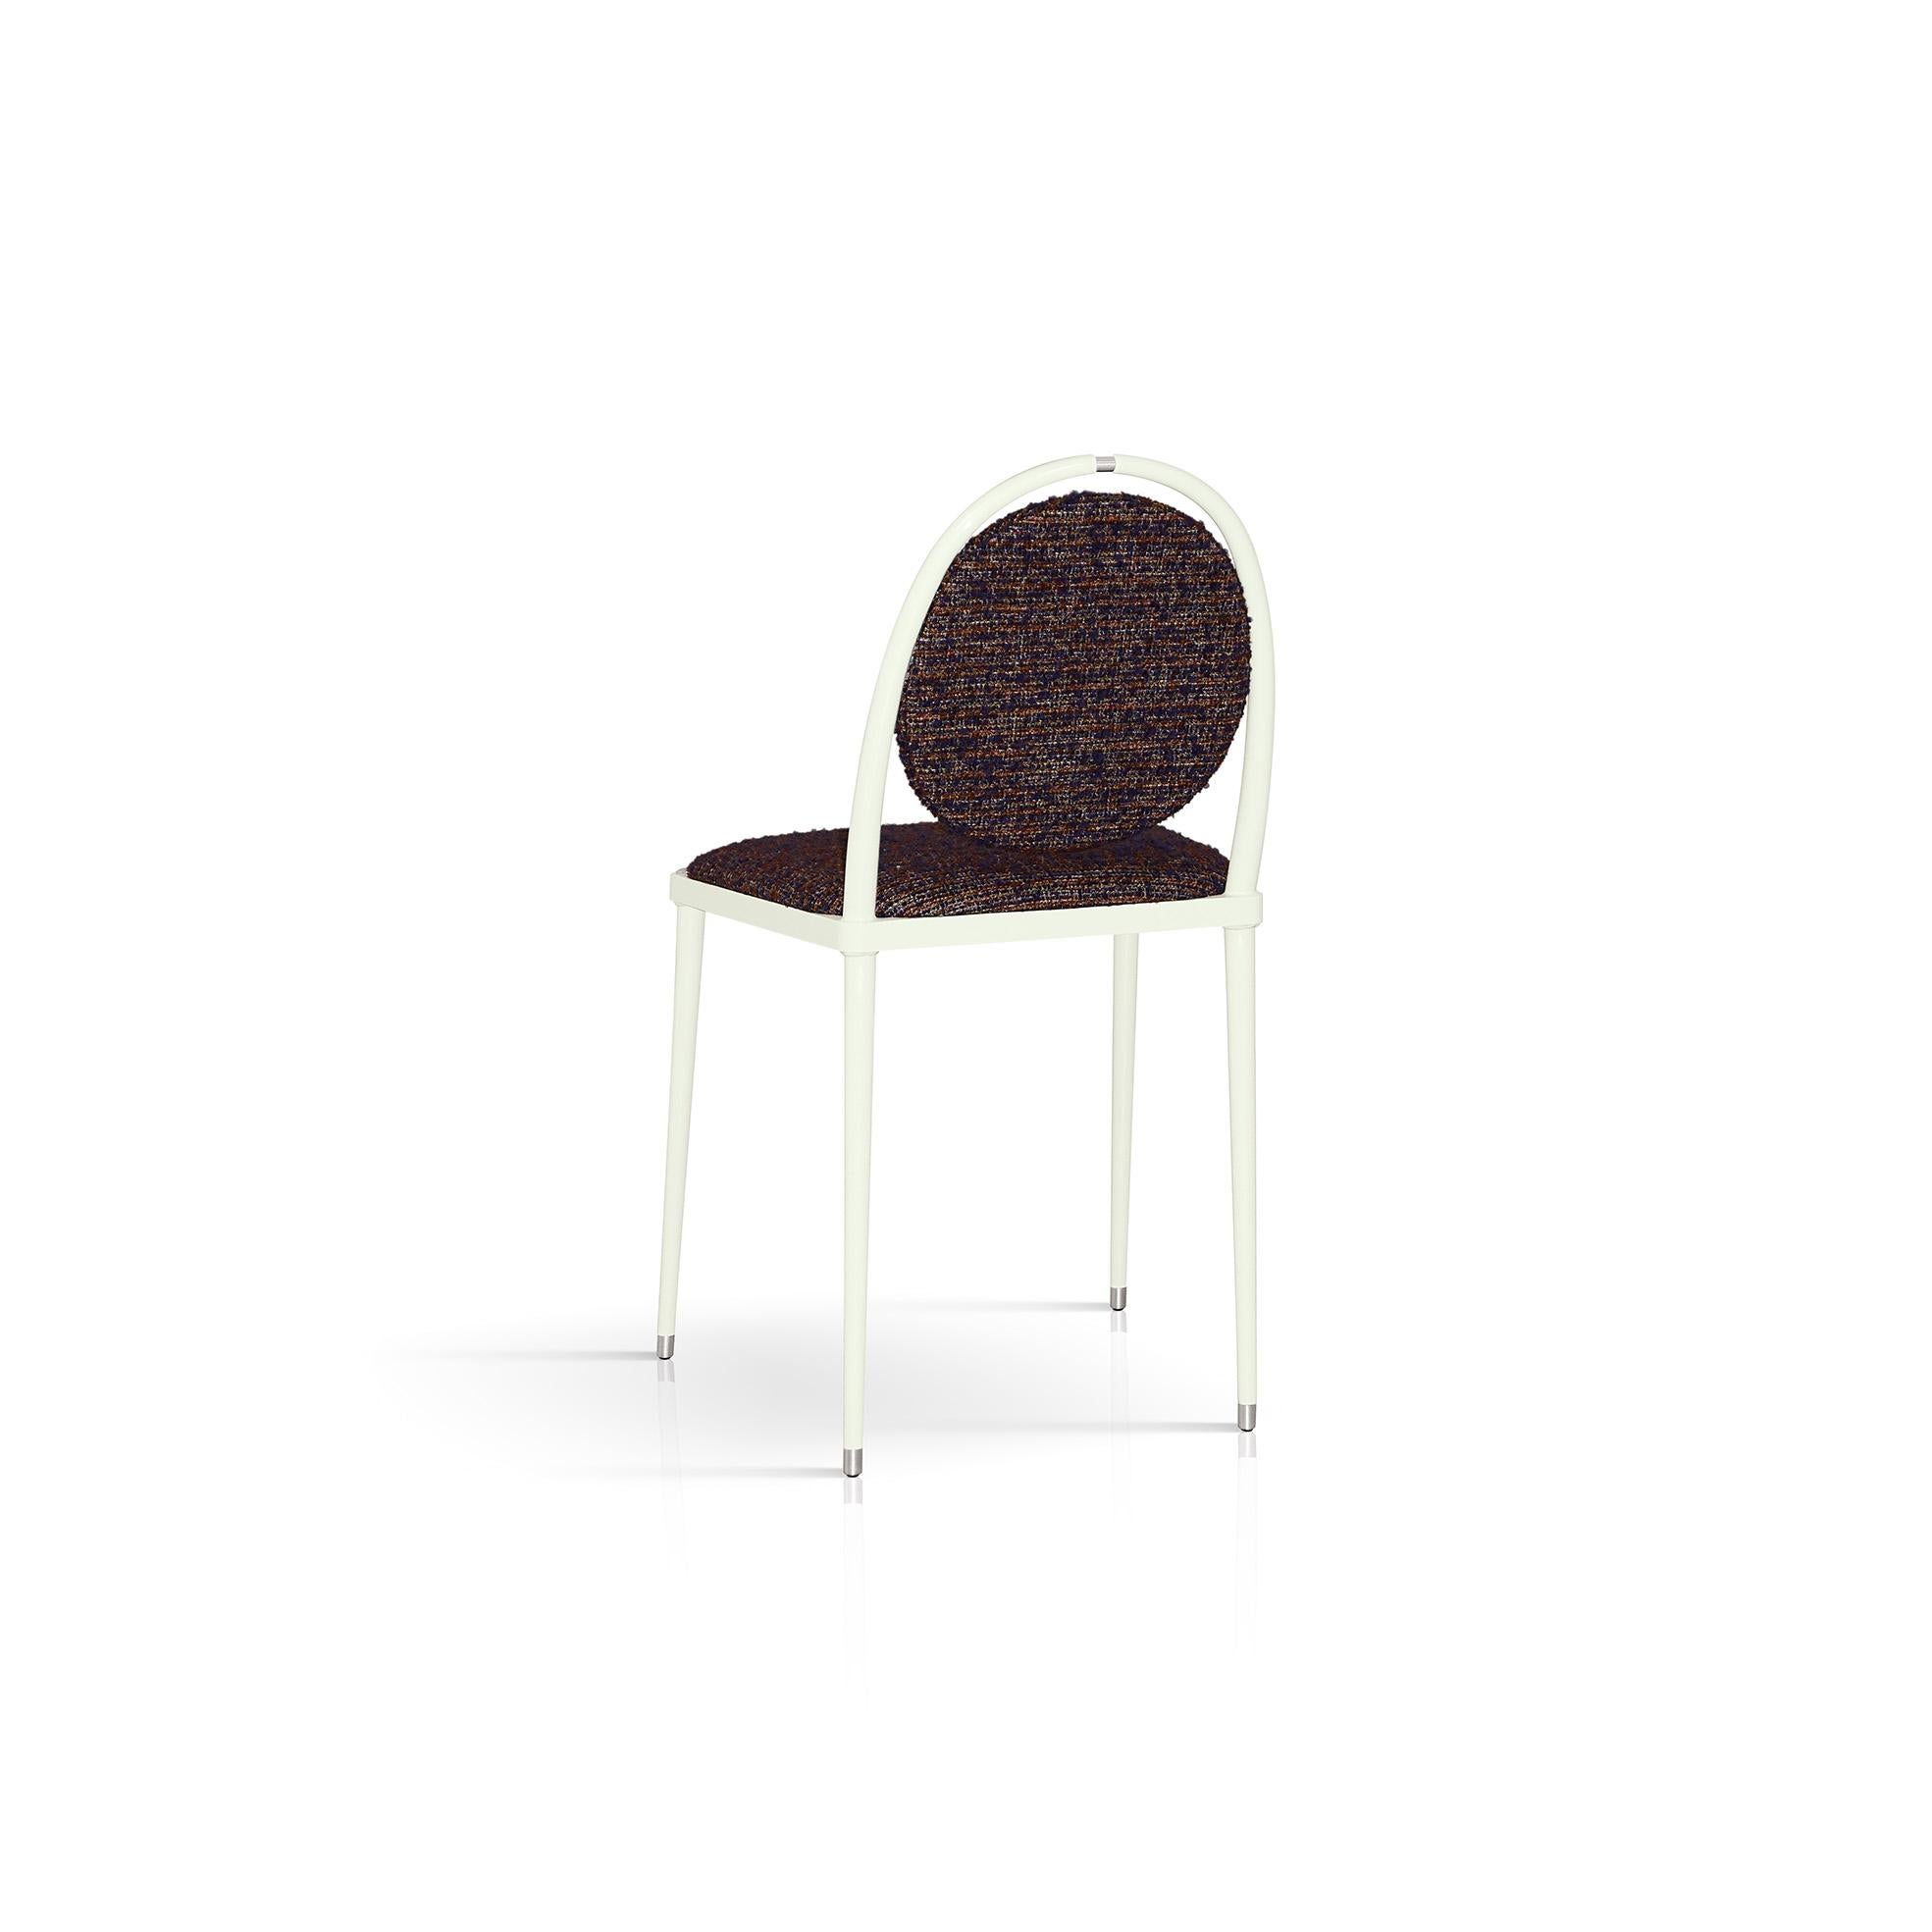 Part of the Balzaretti series of chairs distinguished for its rich colors of textiles and slender silhouettes, this chair will become the center of attention in any dining room with its enticing look. The geometric contours of the ivory gloss metal